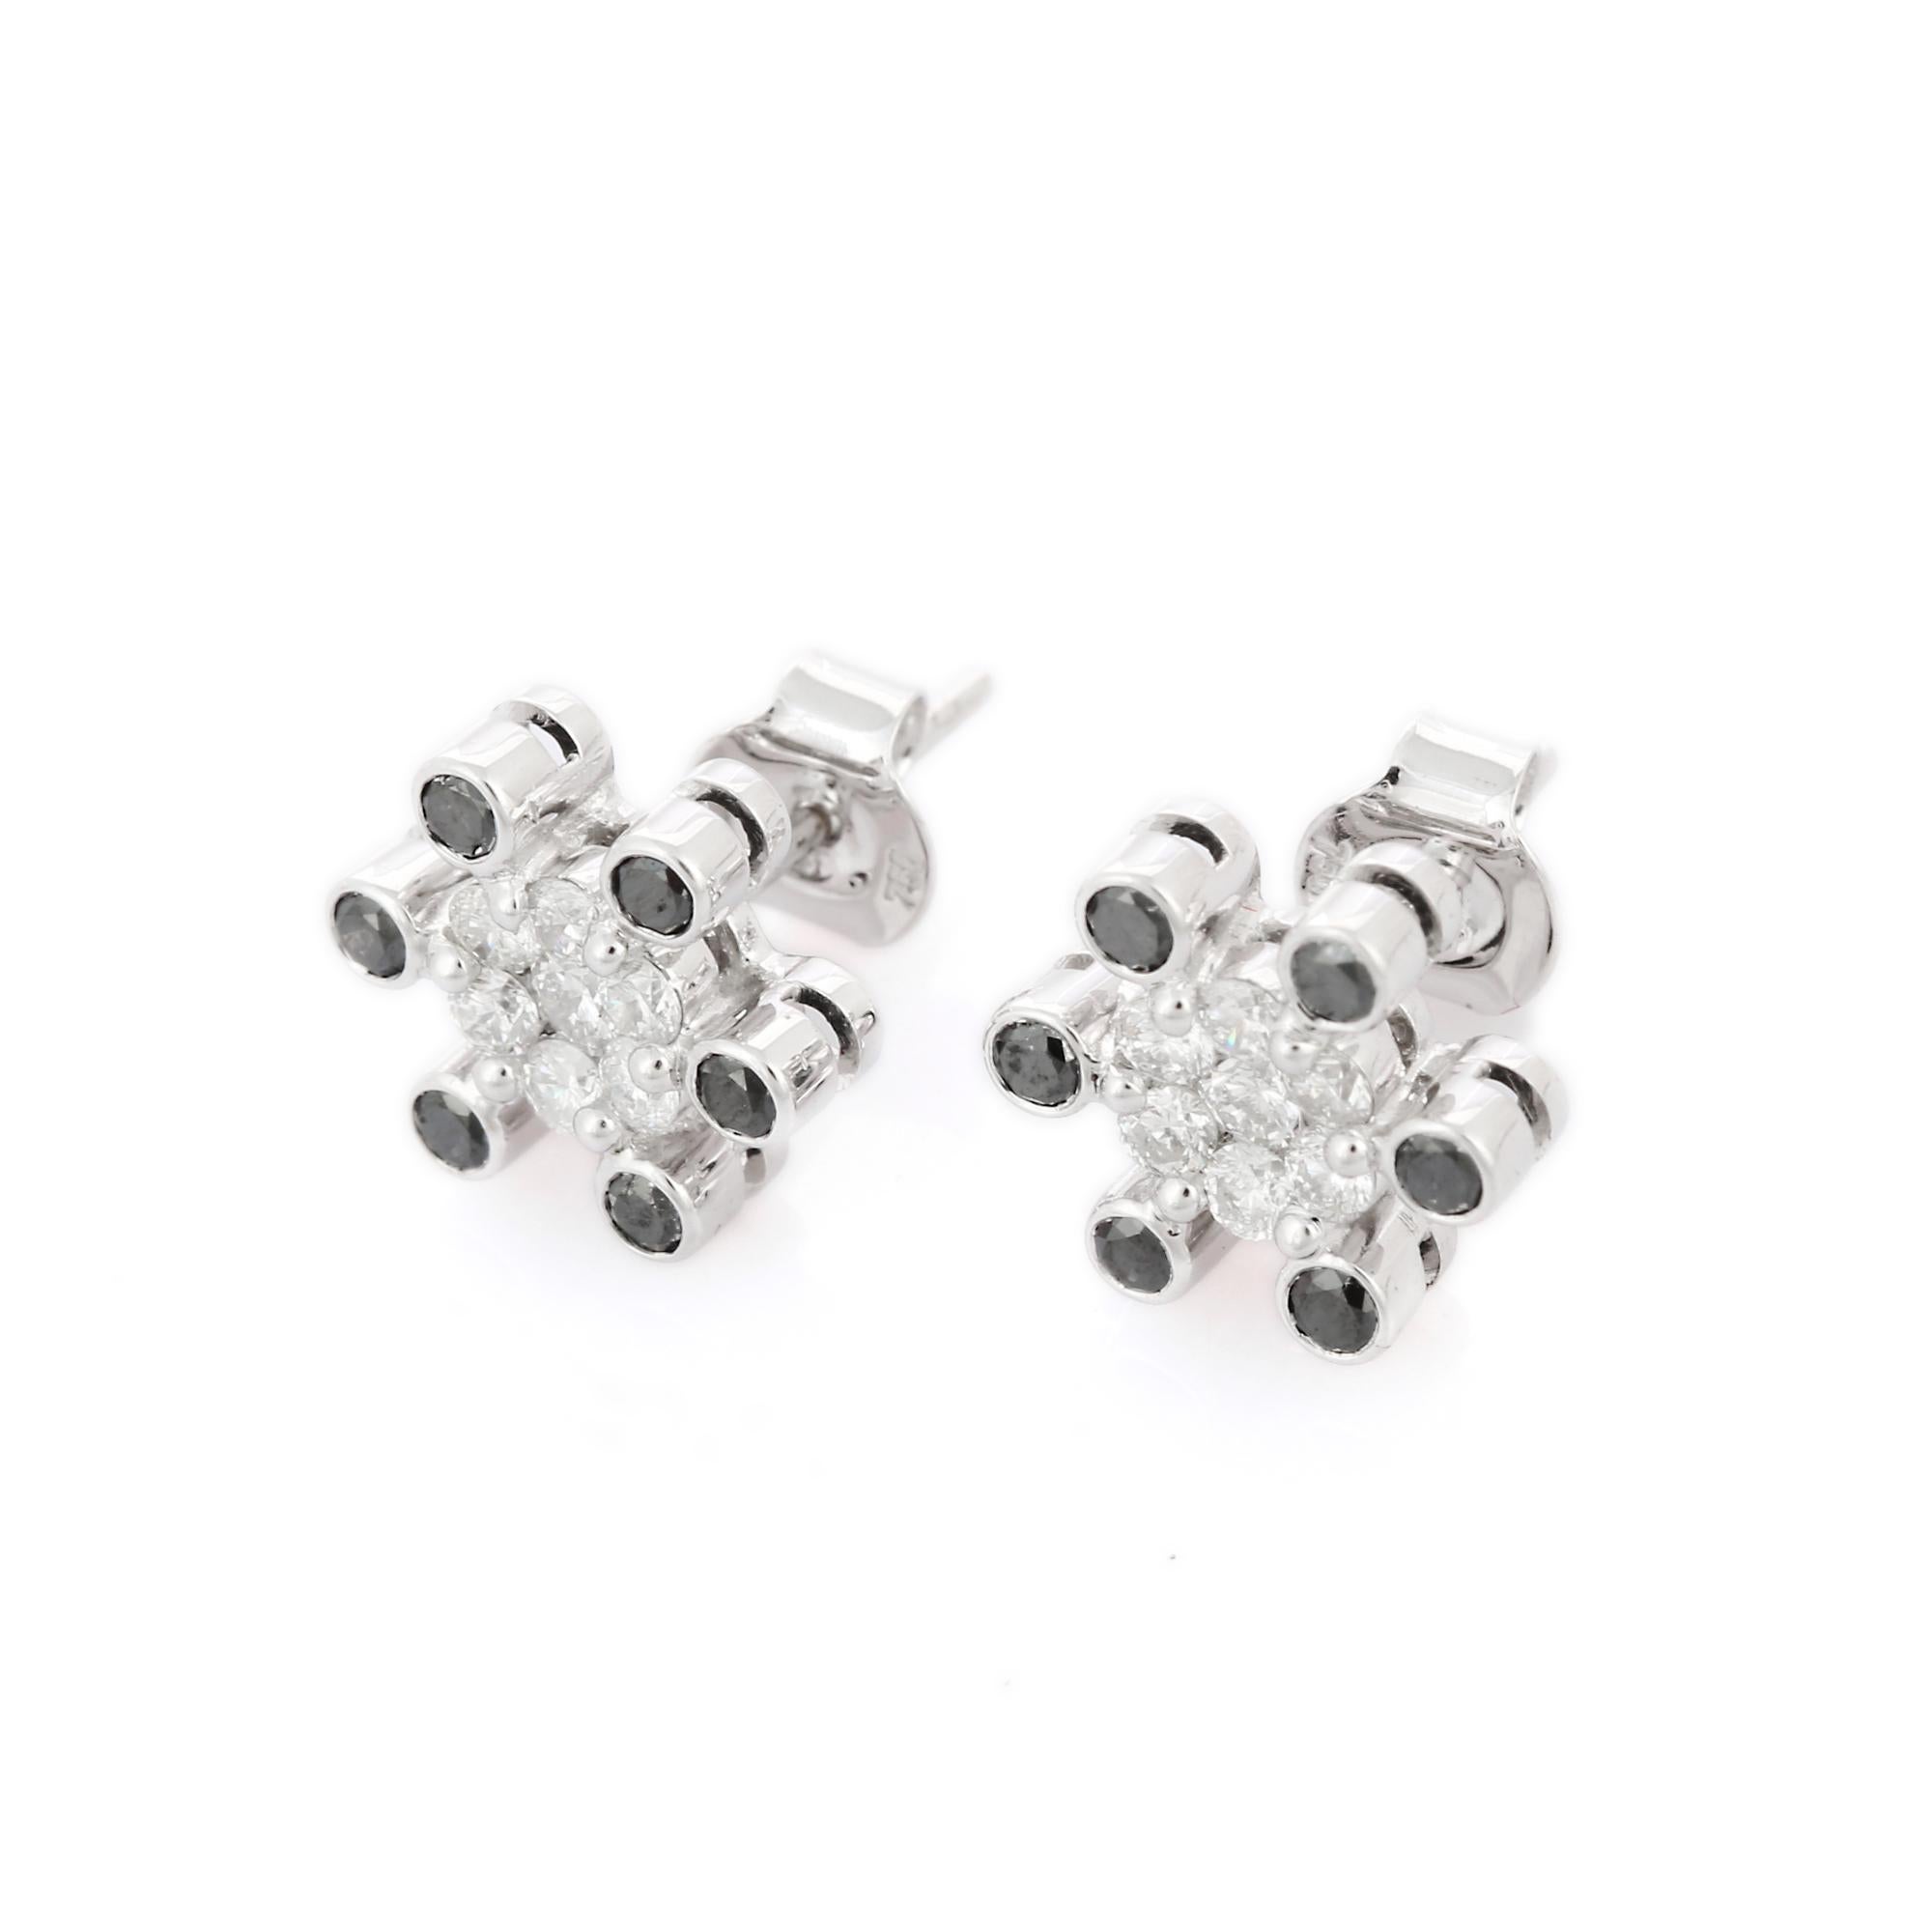 Studs create a subtle beauty while showcasing the colors of the natural precious gemstones and illuminating diamonds making a statement.

Round cut black diamond studs in 18K gold. Embrace your look with these stunning pair of earrings suitable for